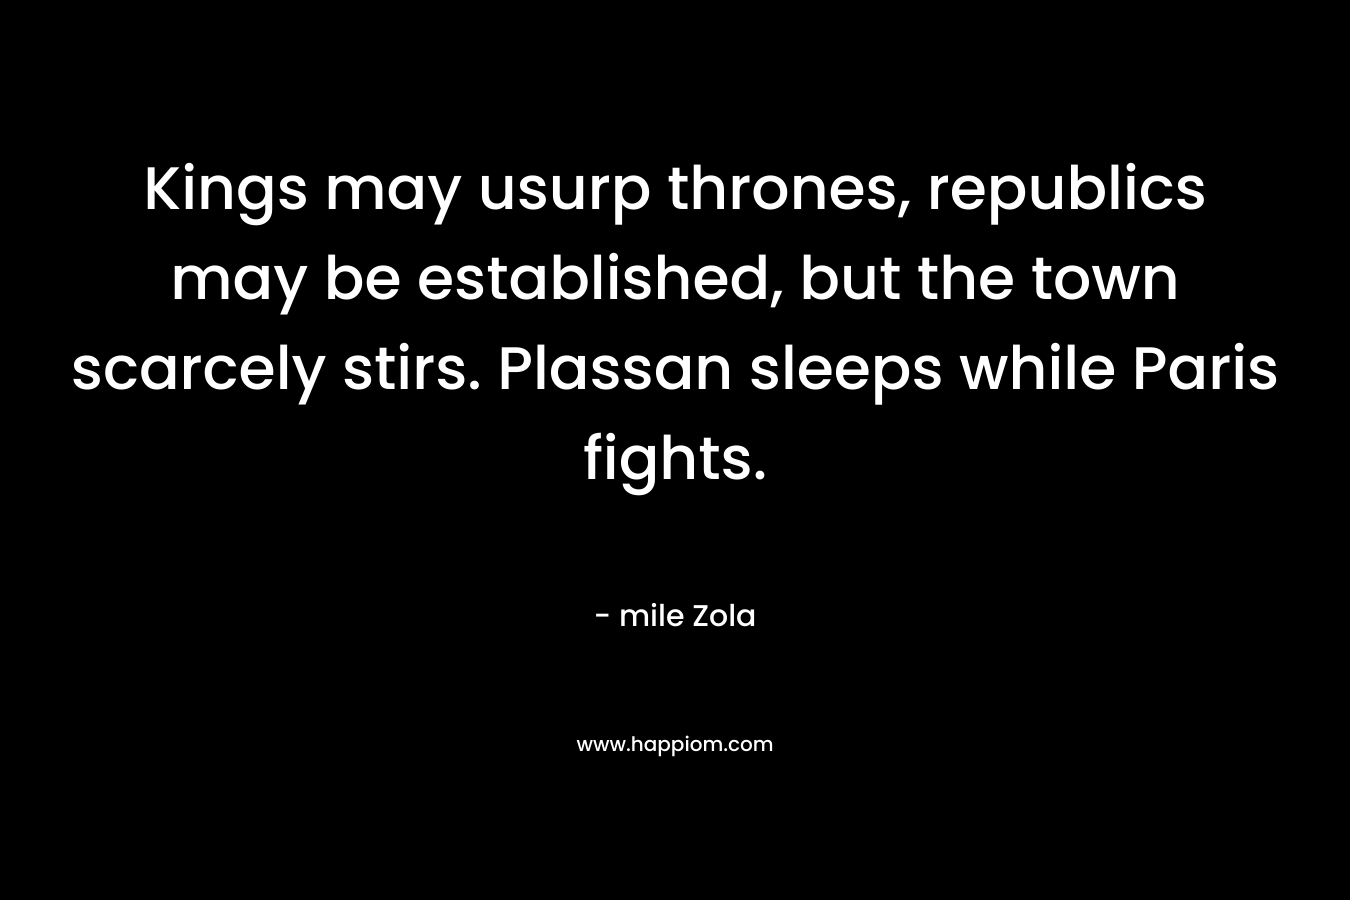 Kings may usurp thrones, republics may be established, but the town scarcely stirs. Plassan sleeps while Paris fights. – mile Zola